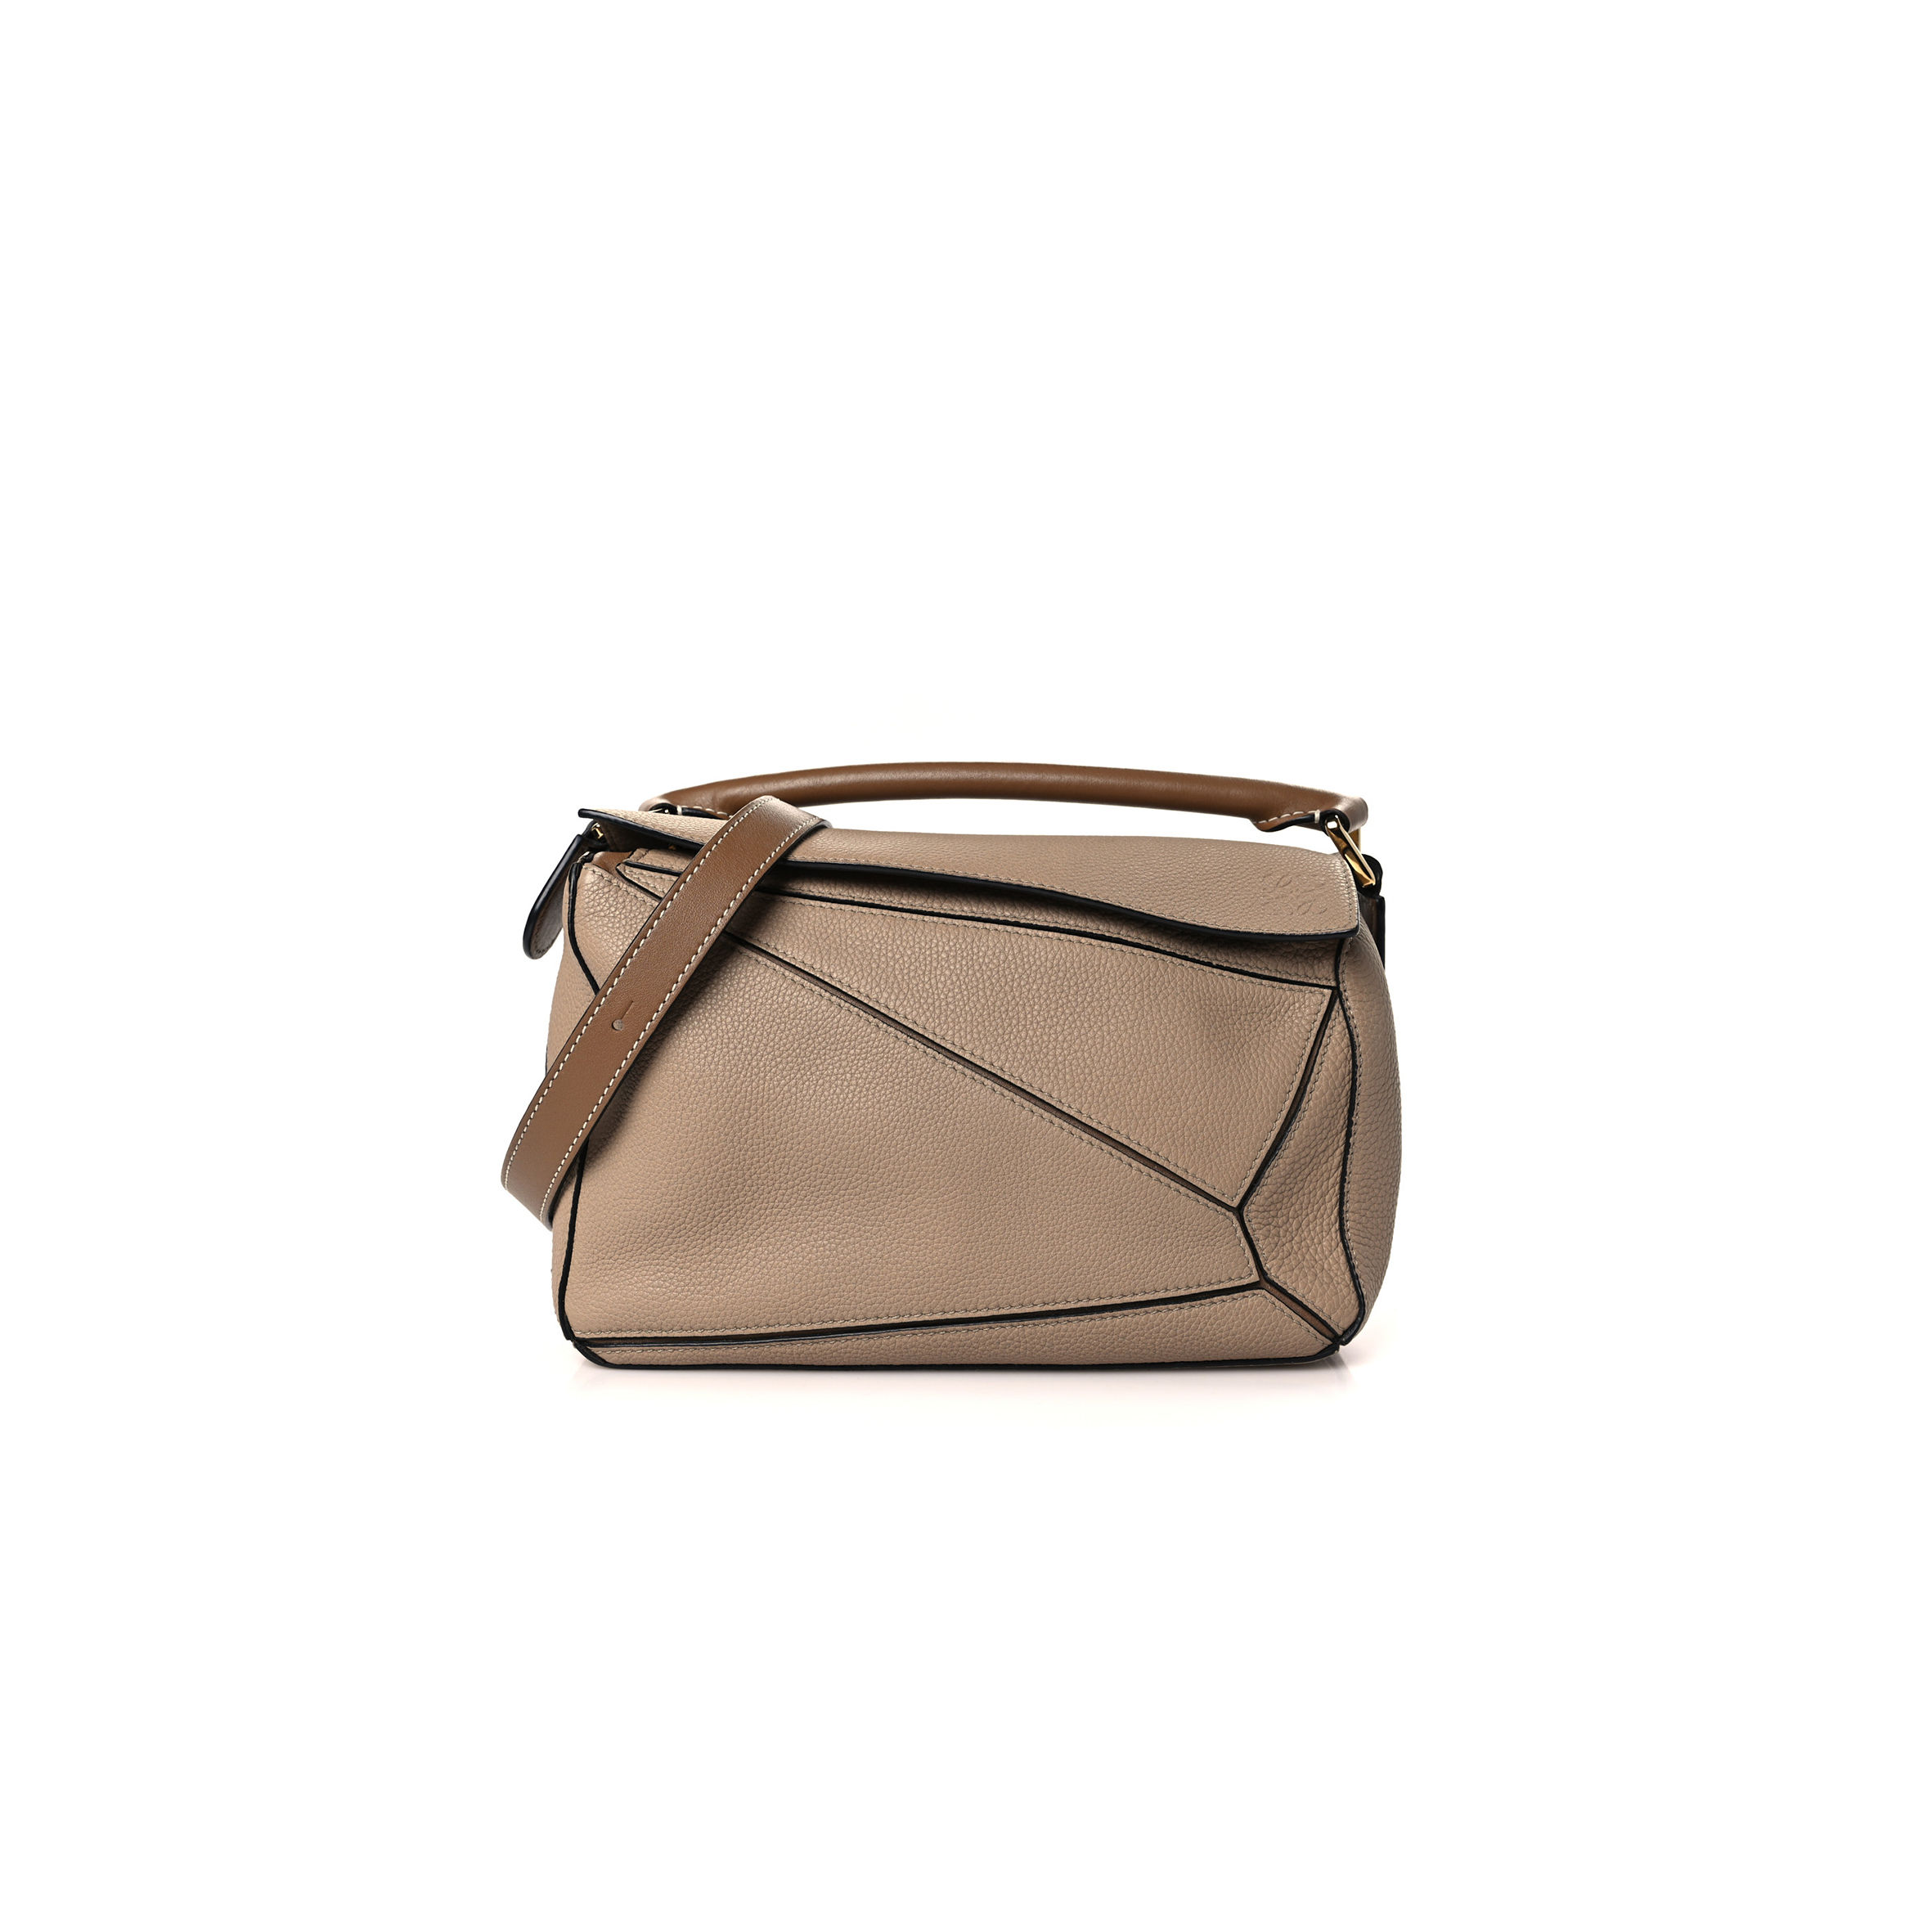 LOEWE GRAINED CALFSKIN SMALL PUZZLE BAG SAND MINK (24*16.5*10.5cm)